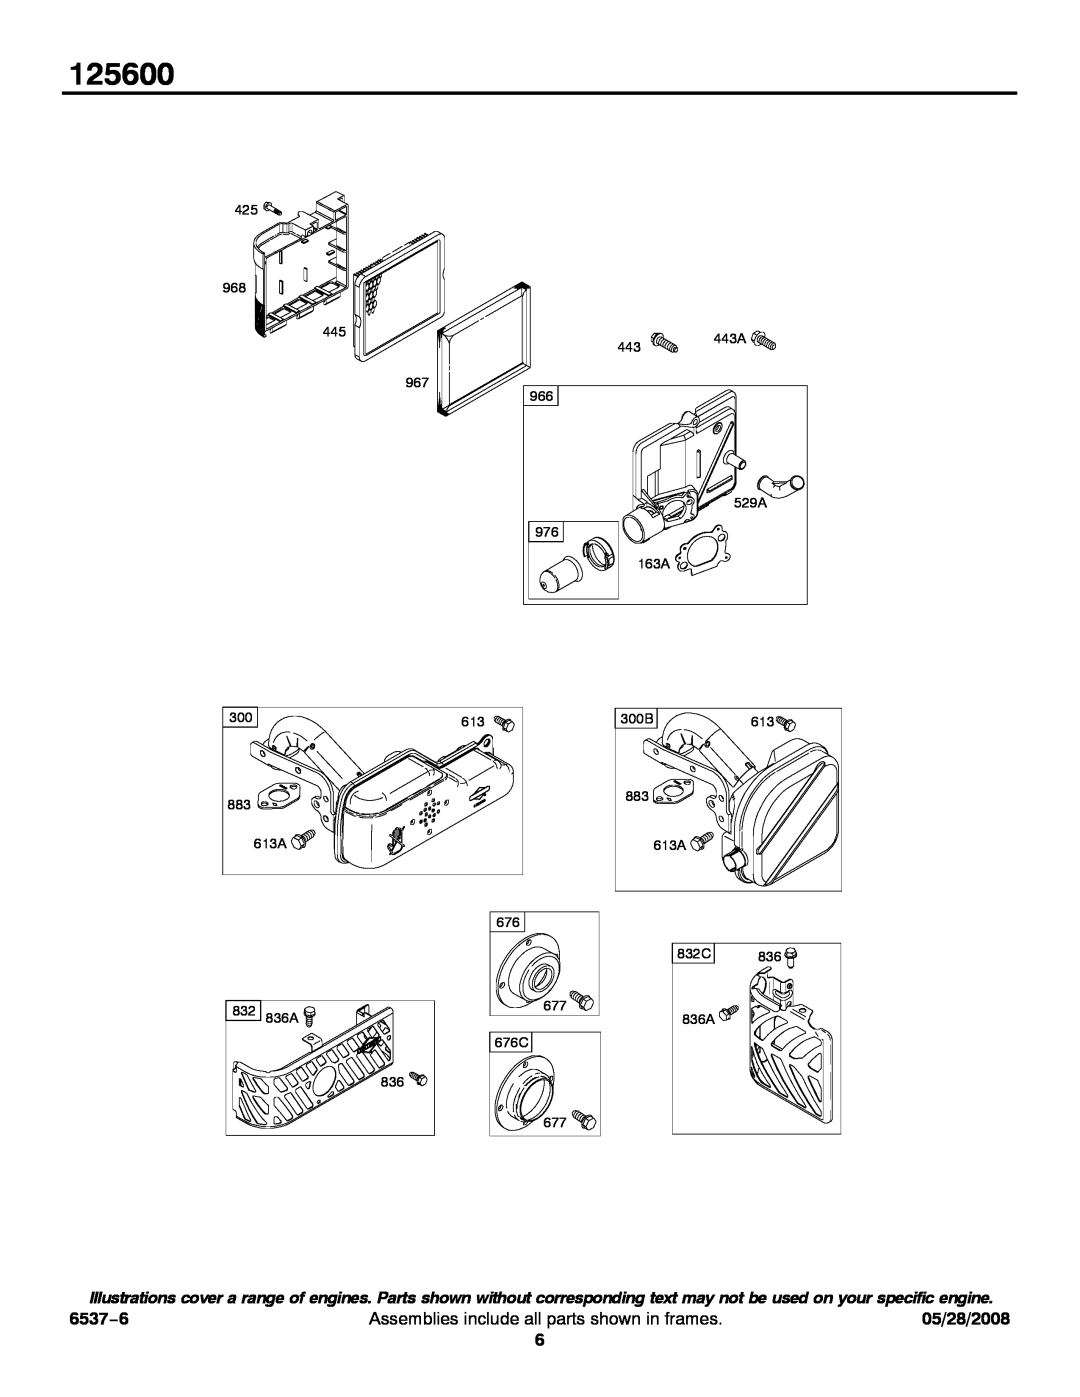 Briggs & Stratton 125600 service manual 6537−6, Assemblies include all parts shown in frames, 05/28/2008 